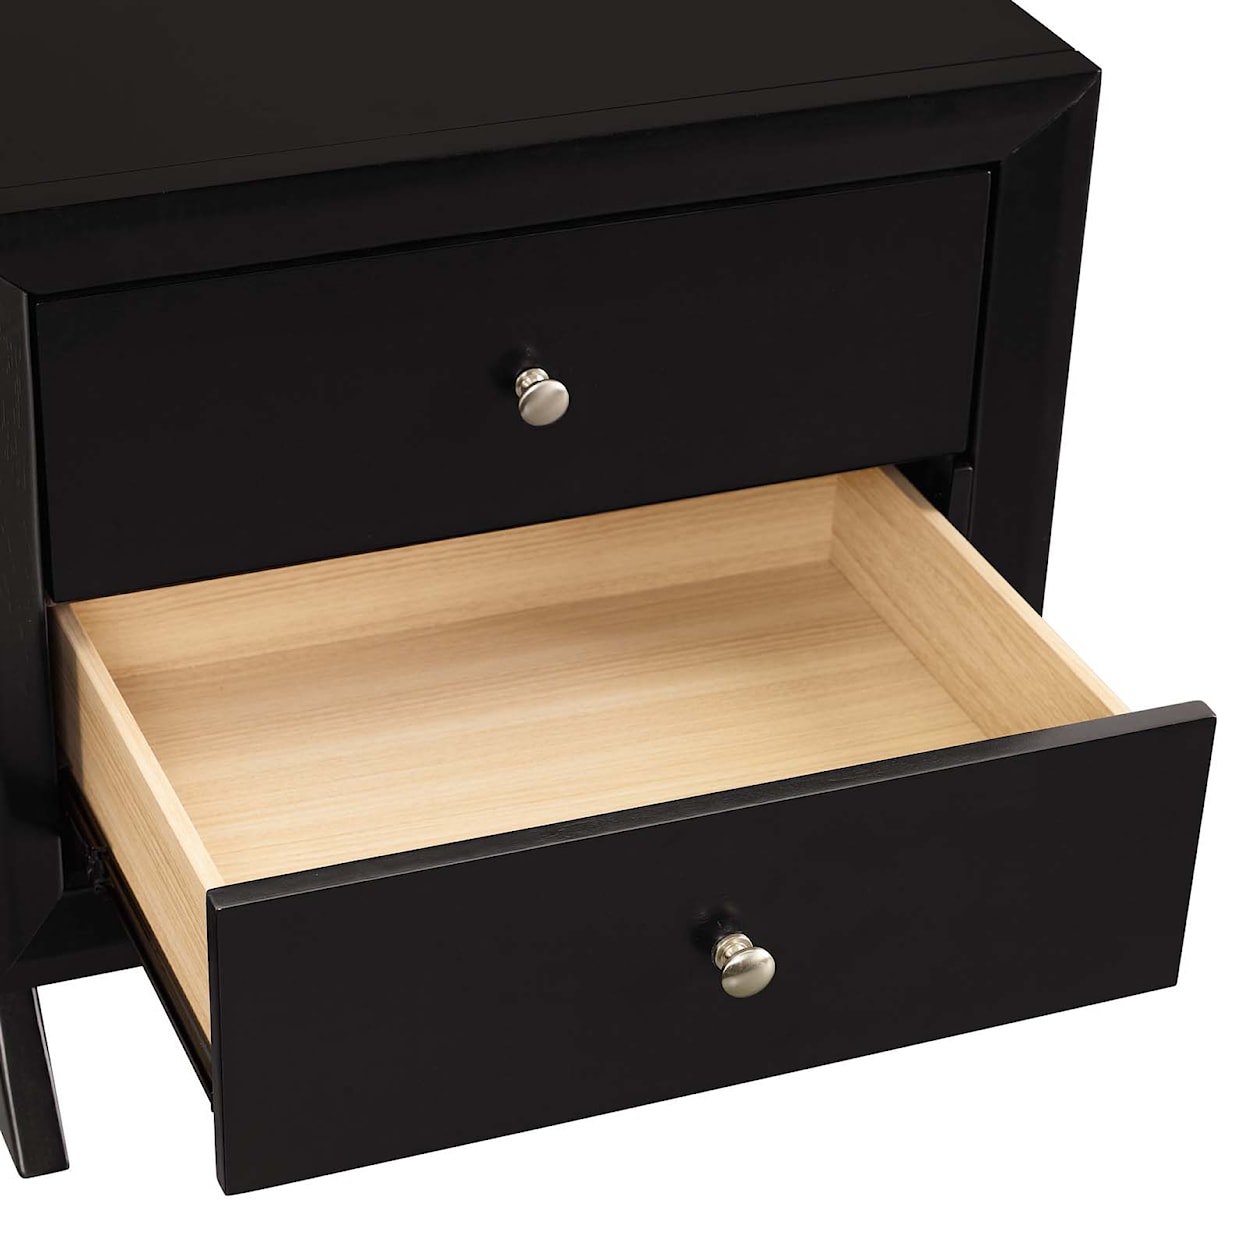 Modway Providence Nightstand